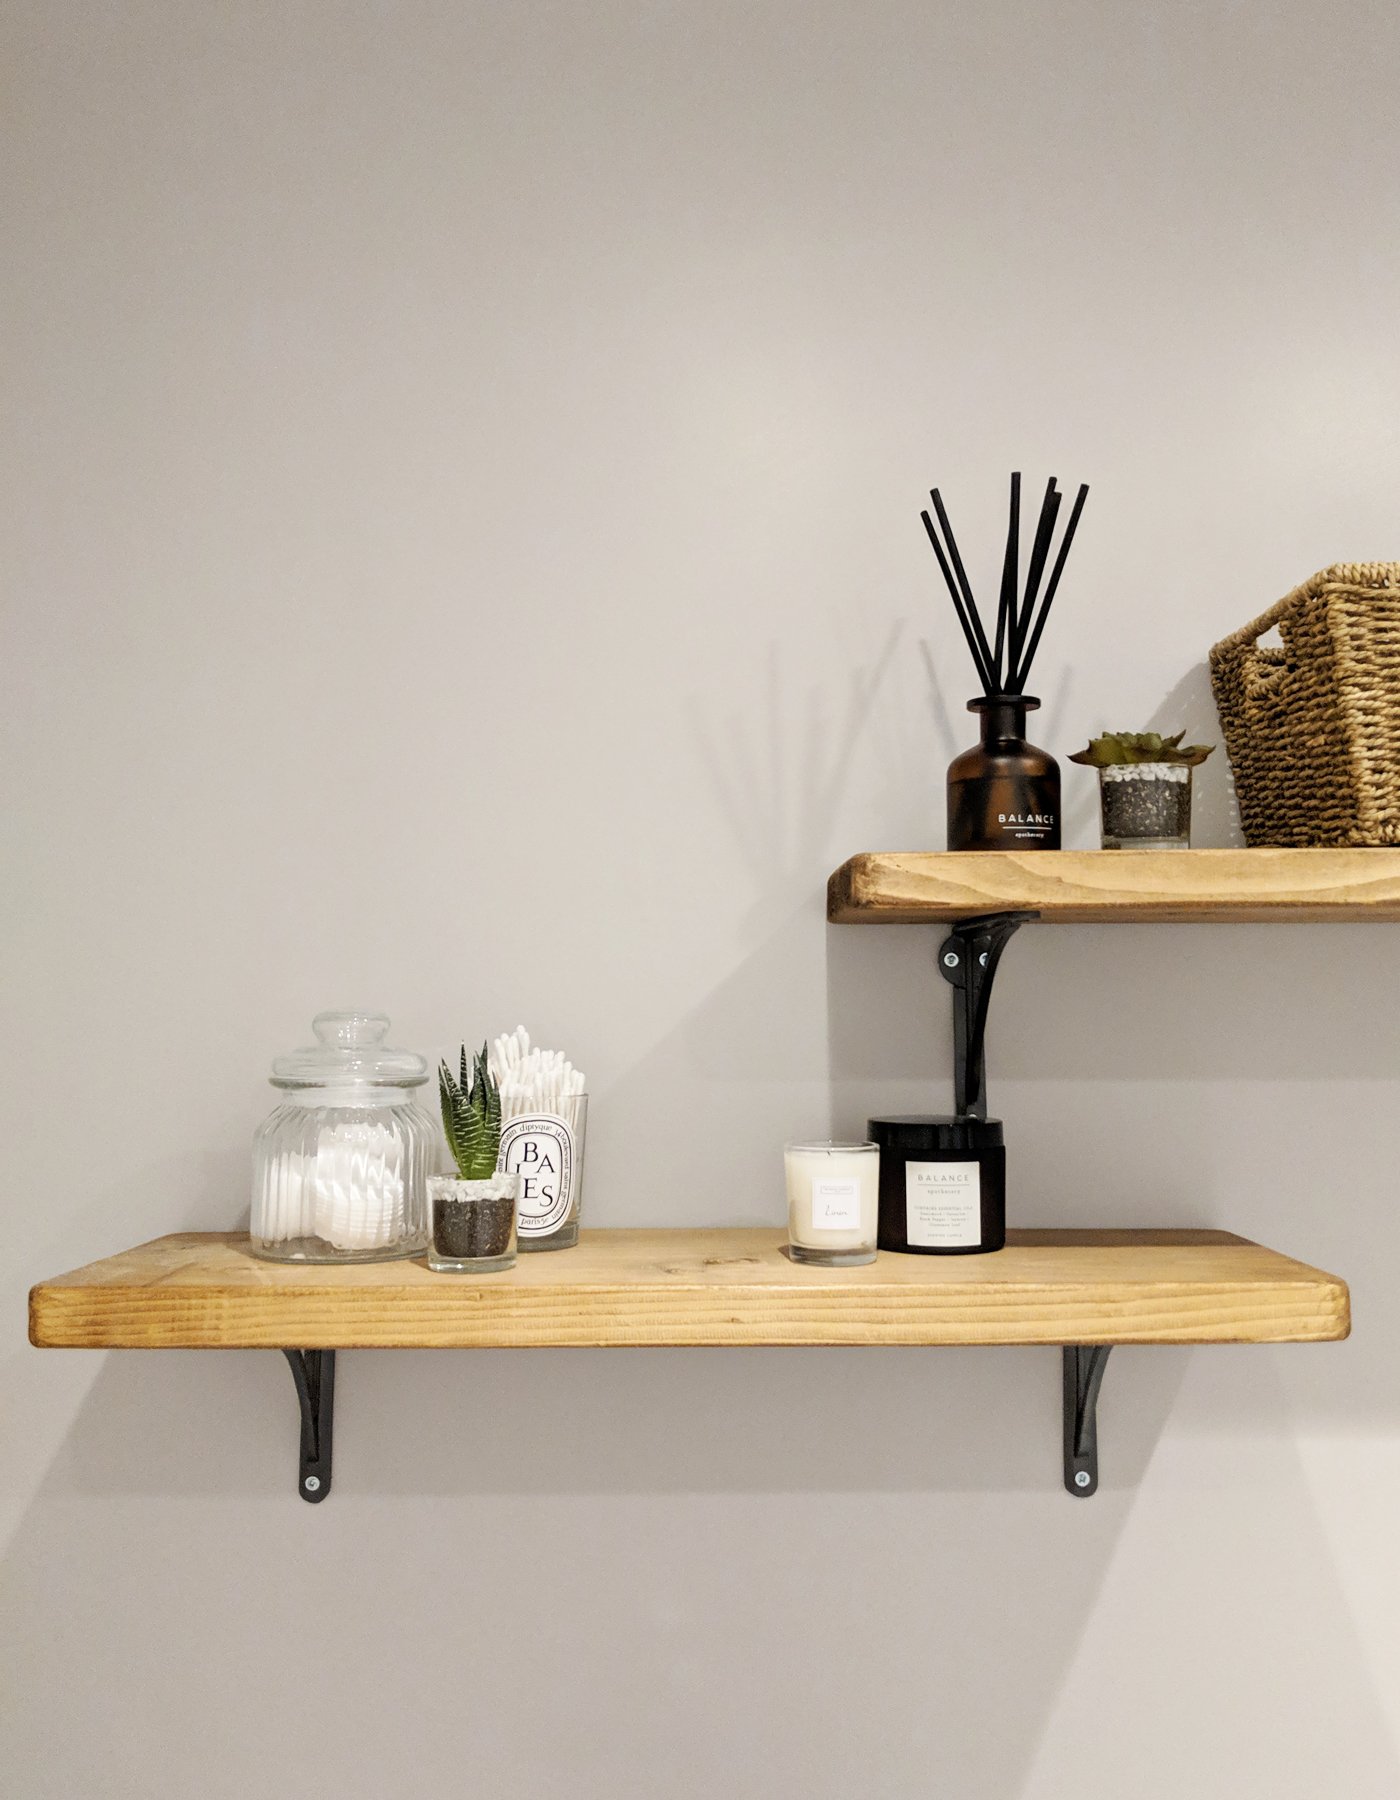 Etsy recycled wooden shelves